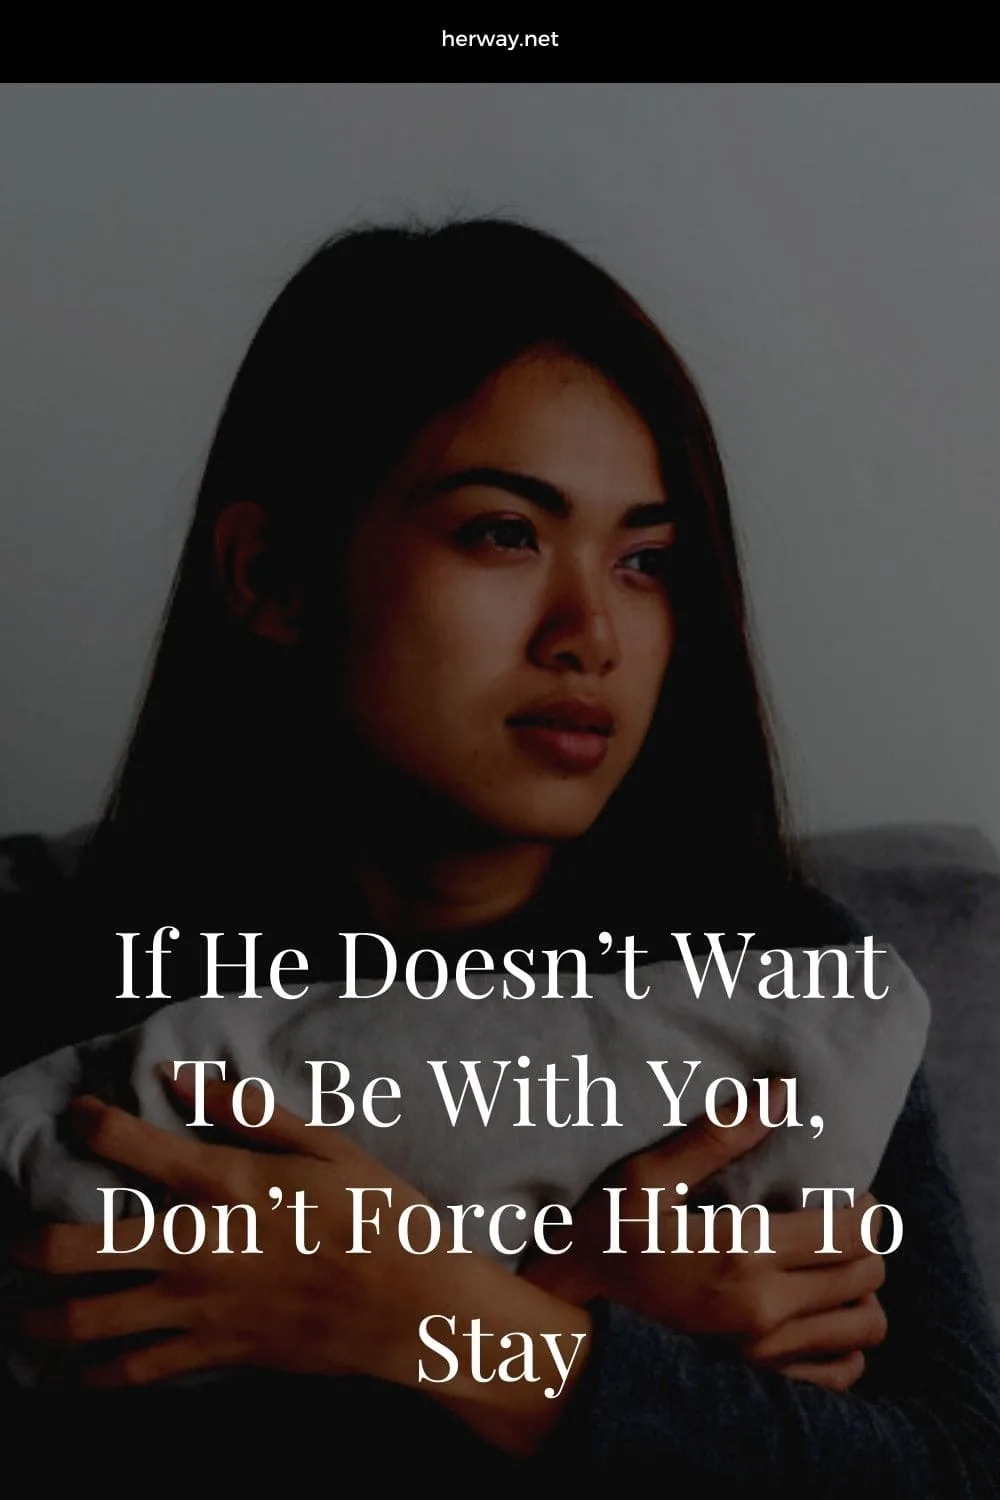 If He Doesn’t Want To Be With You, Don’t Force Him To Stay